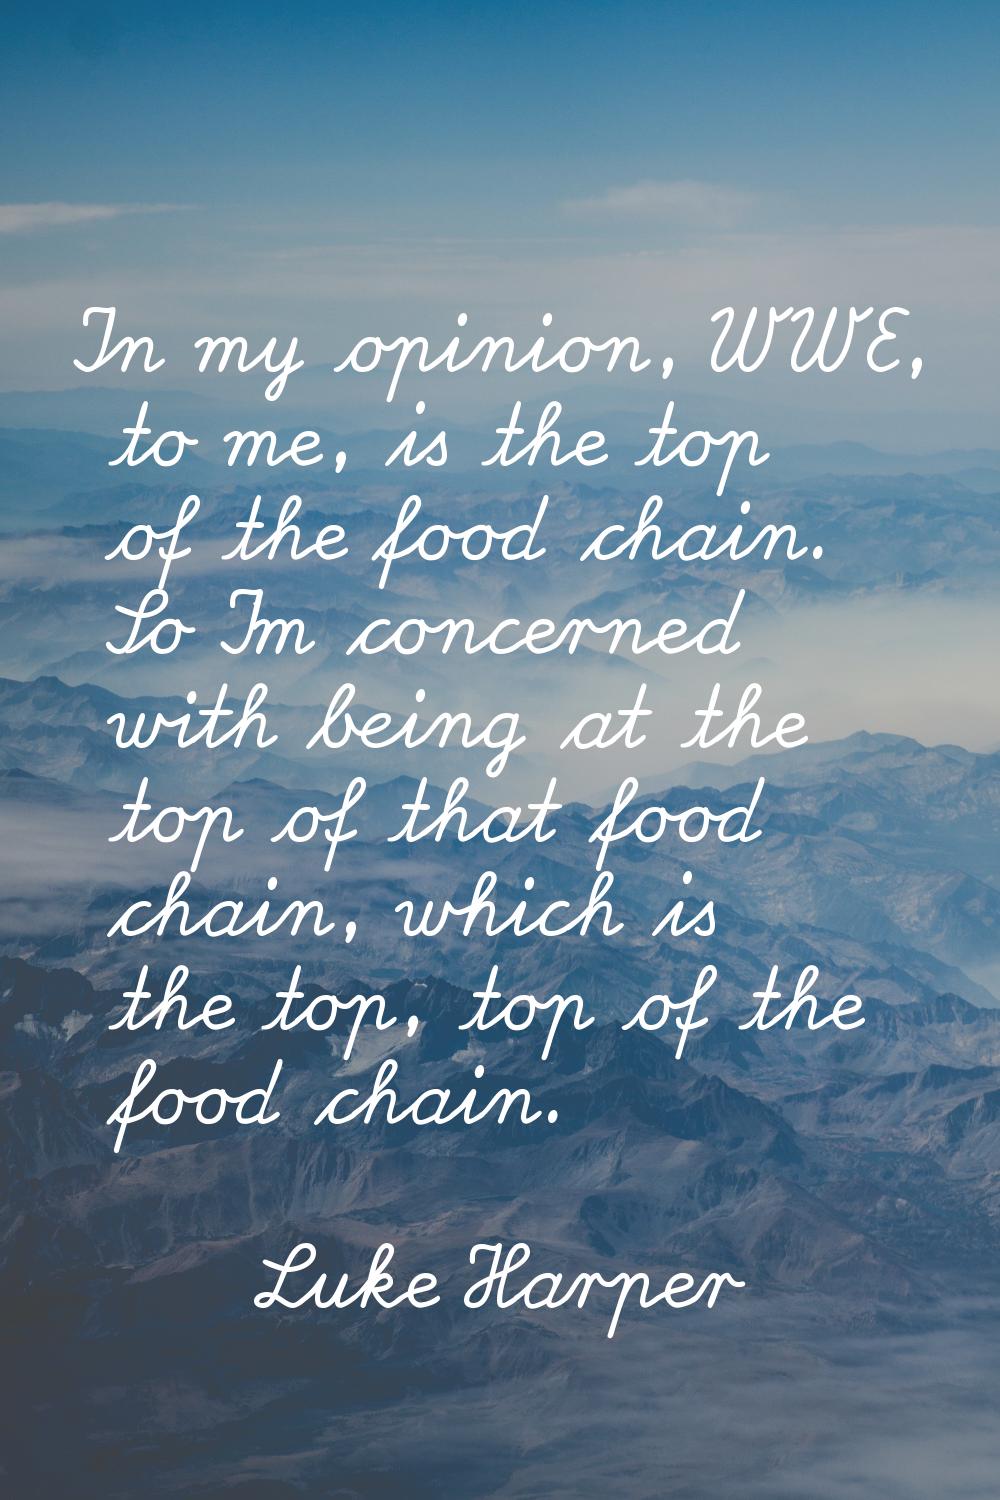 In my opinion, WWE, to me, is the top of the food chain. So I'm concerned with being at the top of 